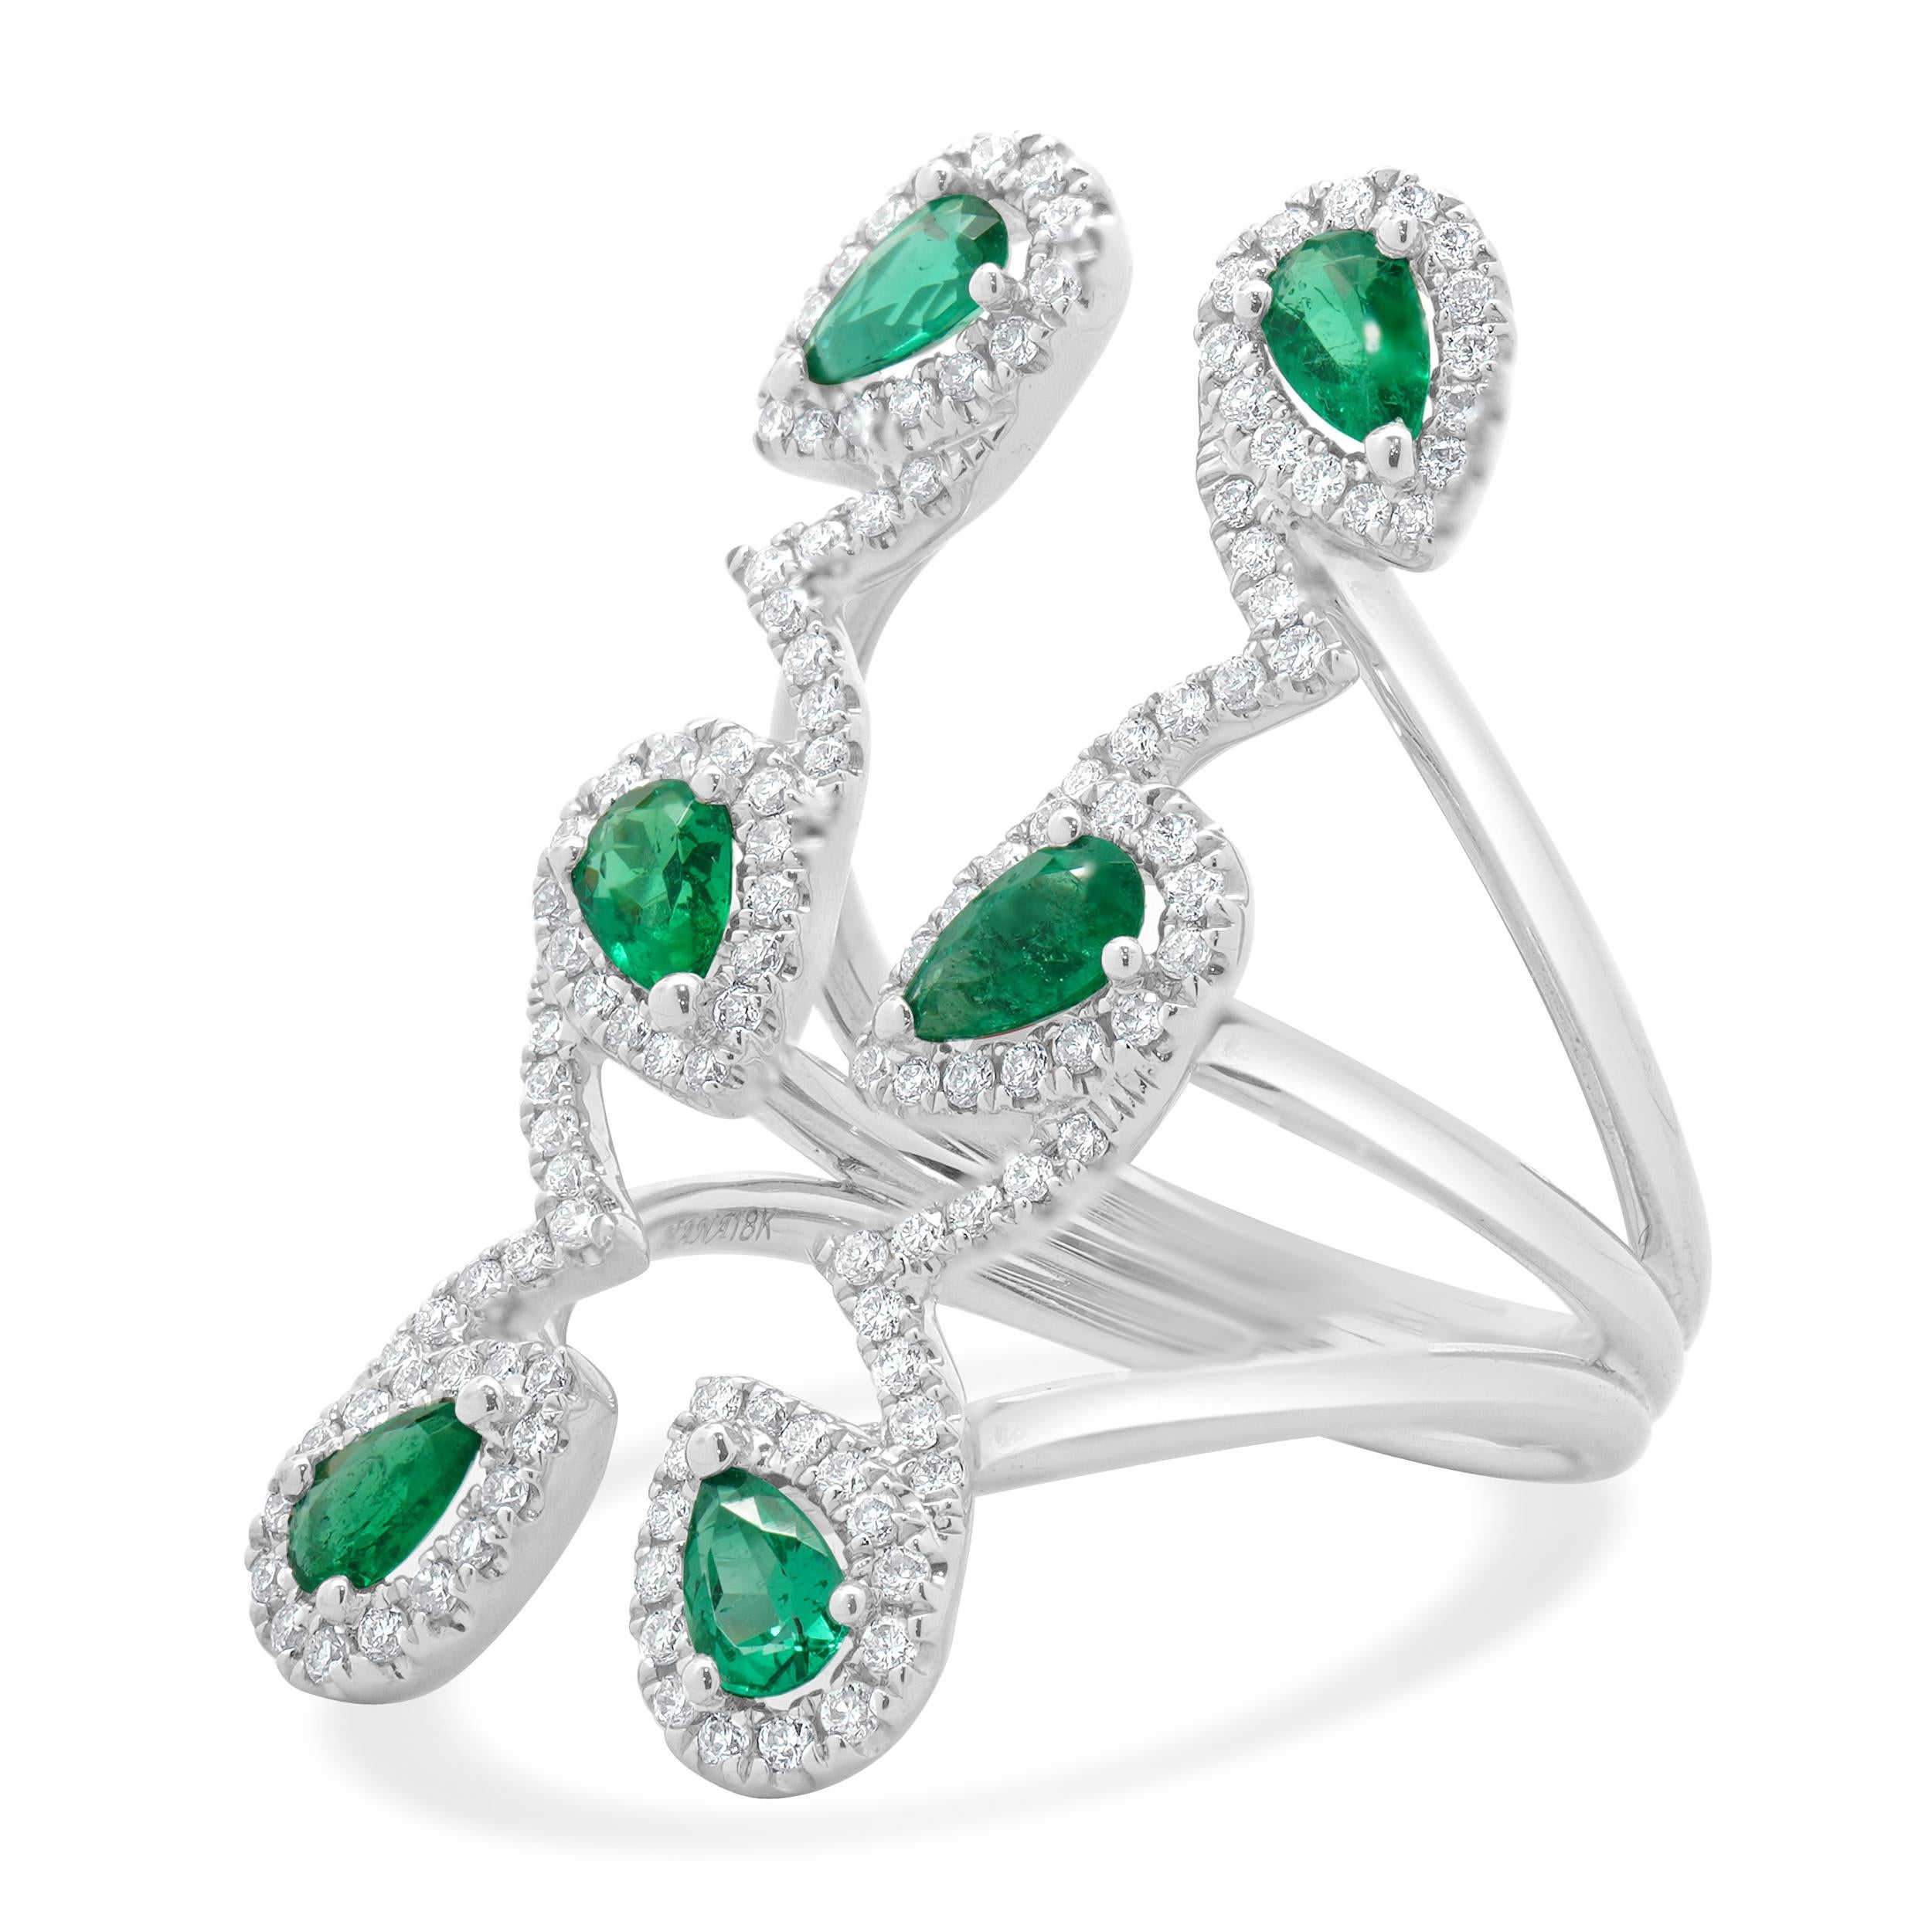 Designer: custom
Material: 18K white gold
Diamonds: 124 round brilliant cut = 0.46cttw
Color: G
Clarity: VS1-2
Emerald: 6 pear cut = 0.74cttw
Dimensions: ring top measures 19mm wide
Ring Size: 6.5 (complimentary sizing available)
Weight: 7.12 grams